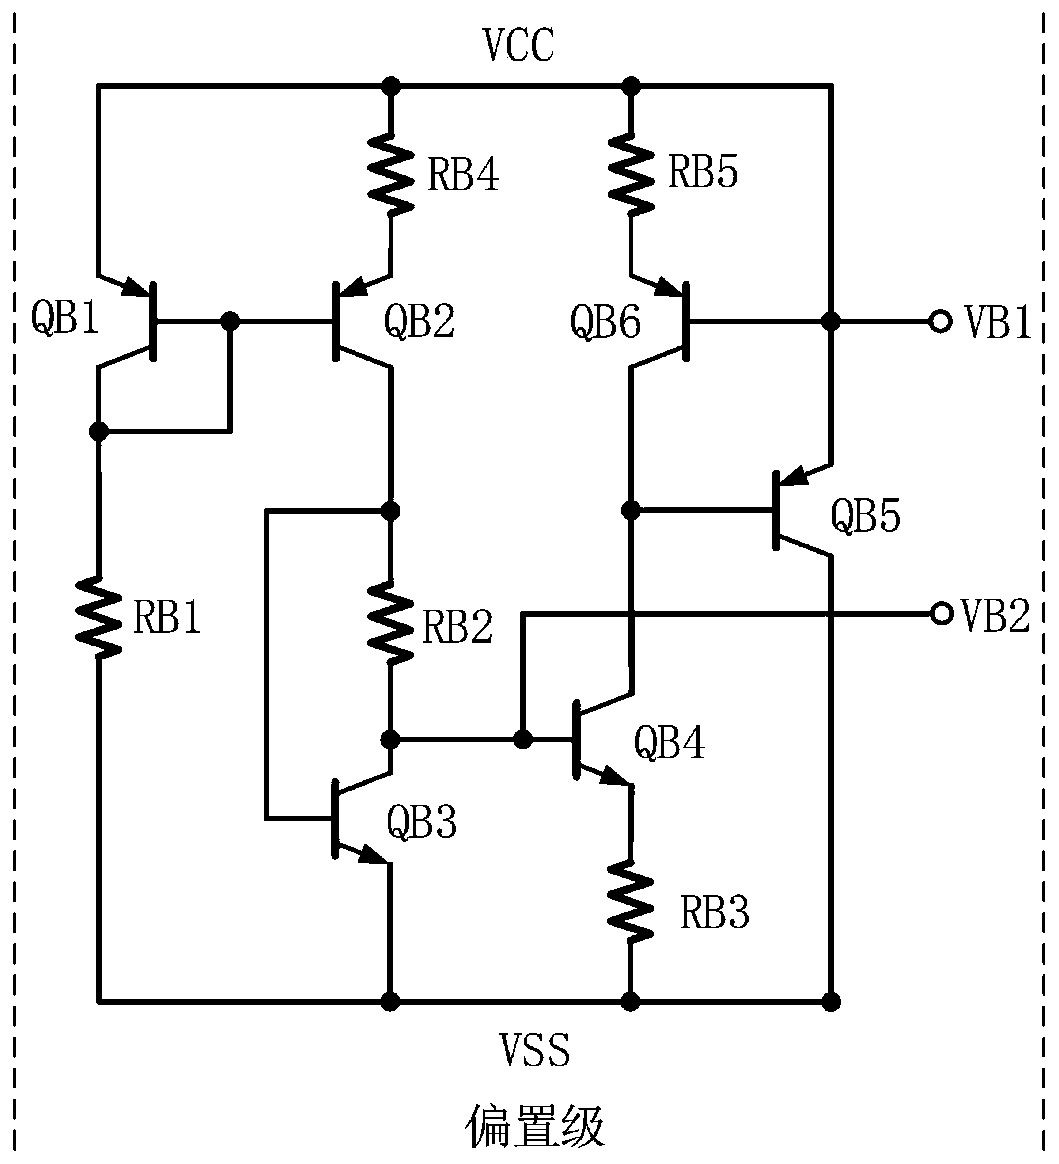 Rail-to-rail input and output operational amplifier based on bipolar process